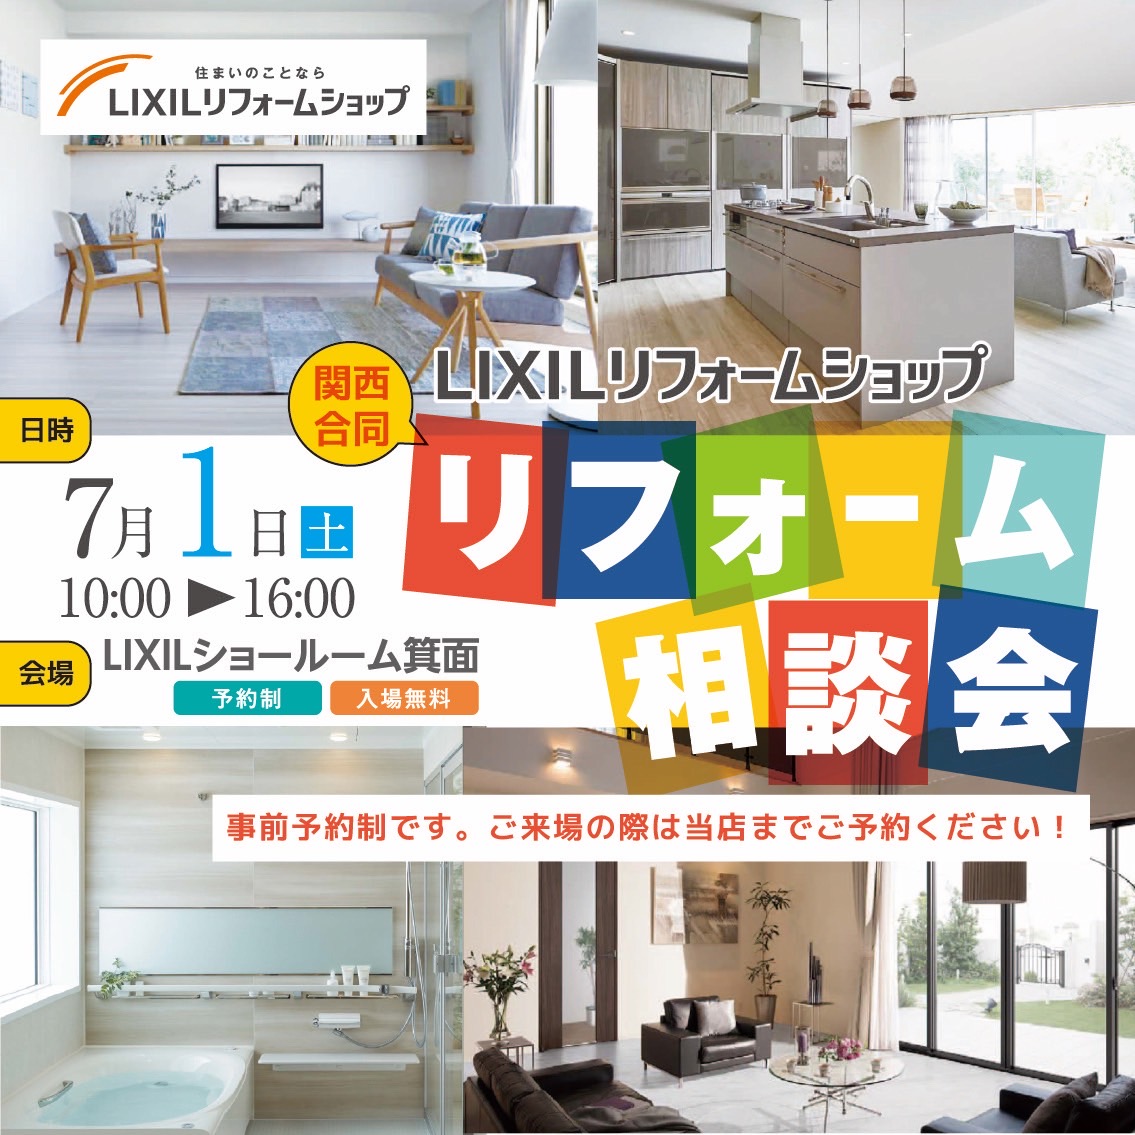 Read more about the article リフォーム相談会を開催します！in LIXILショールーム箕面